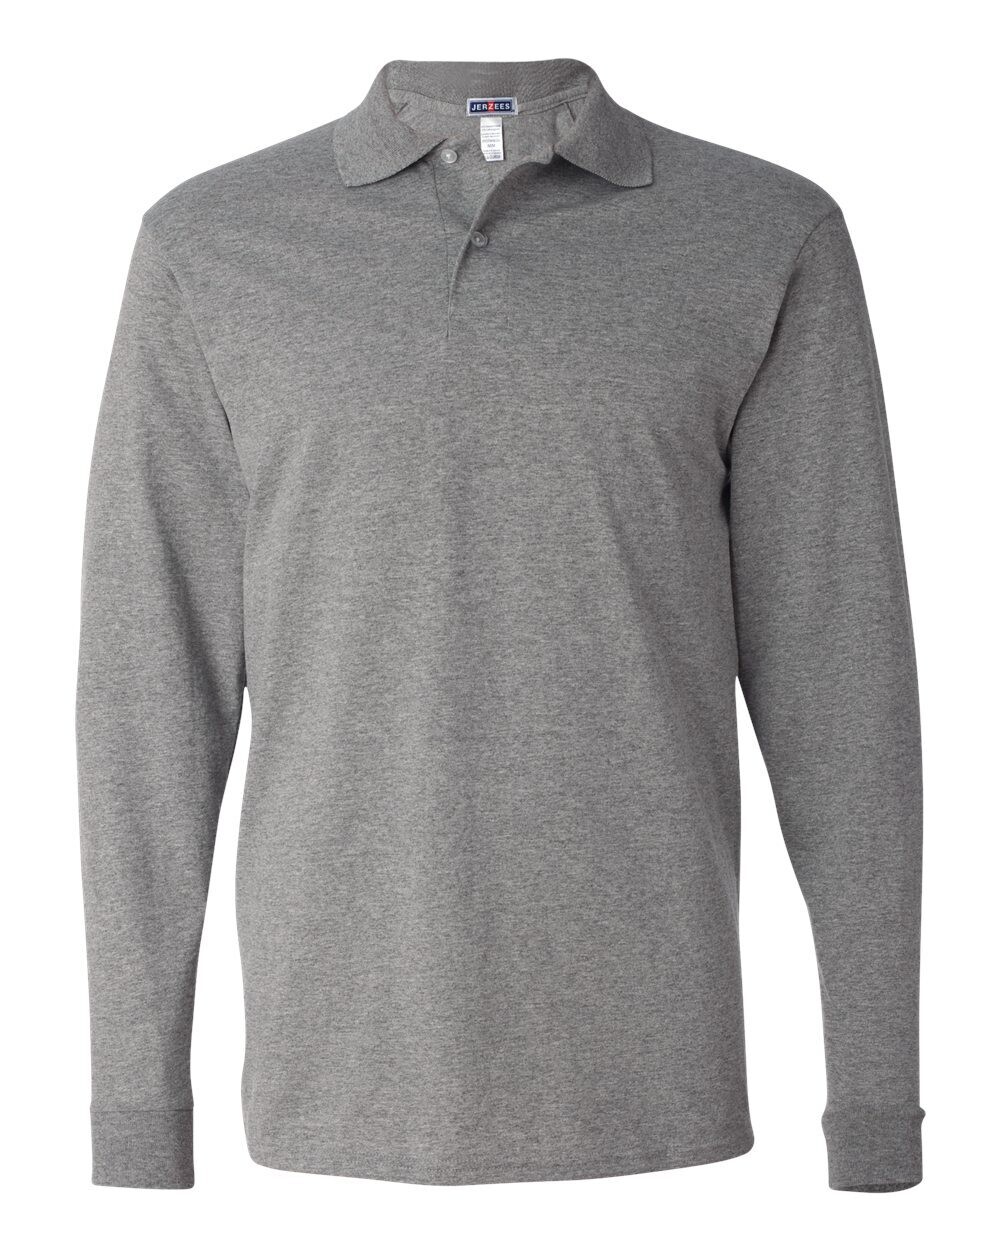 Polo Long Sleeves Adults Oxford Grey